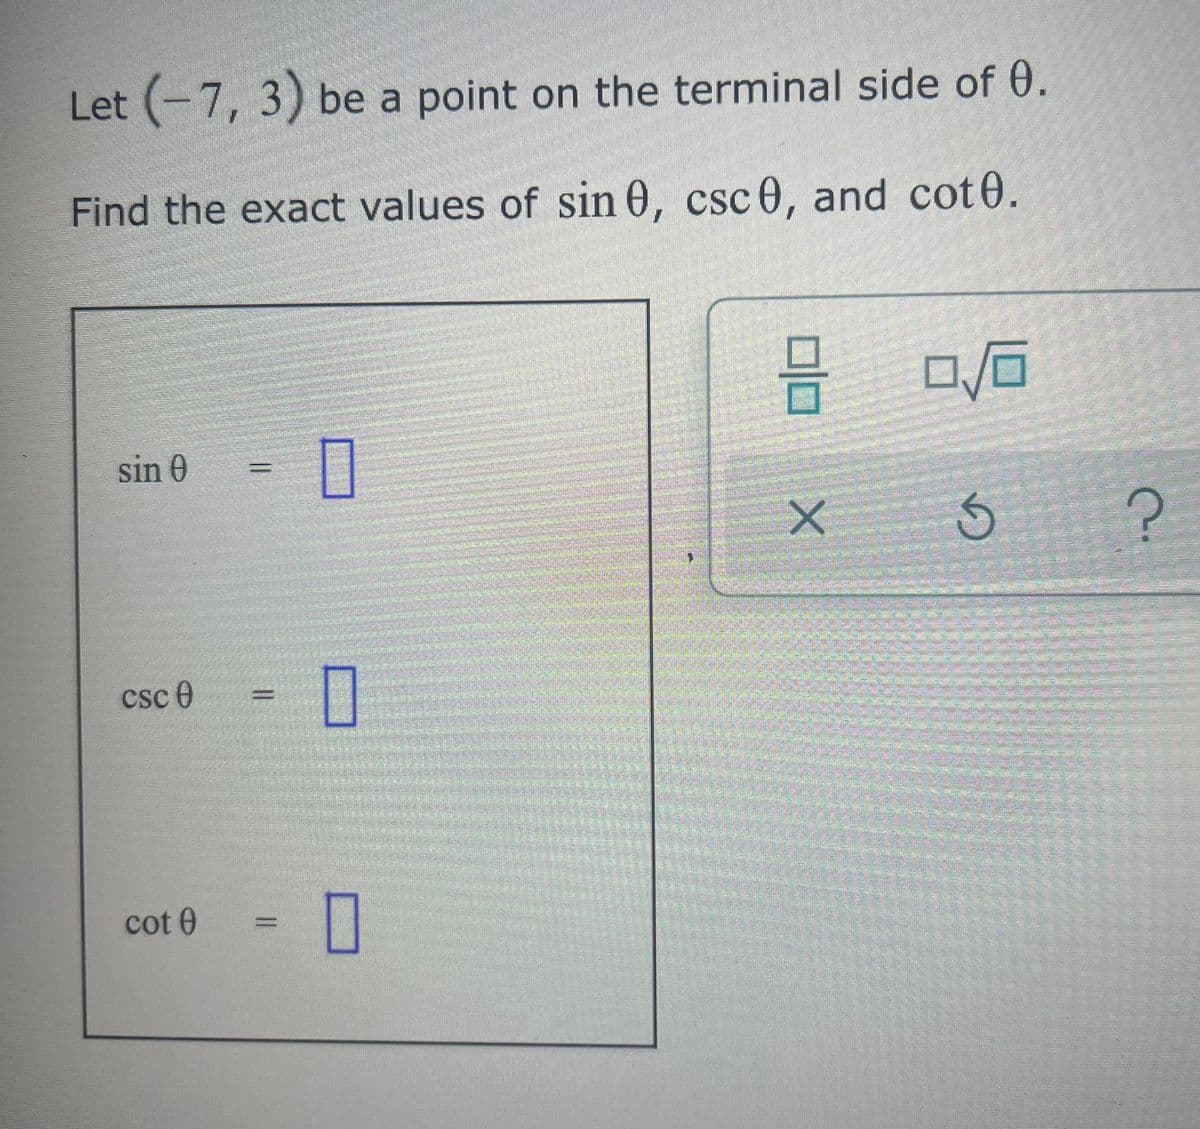 Let (-7, 3) be a point on the terminal side of 0.
Find the exact values of sin 0, csc 0, and cot0.
sin 0
csc 0
cot 0
11
0
1
0
pada
8 0/0
X
G
?